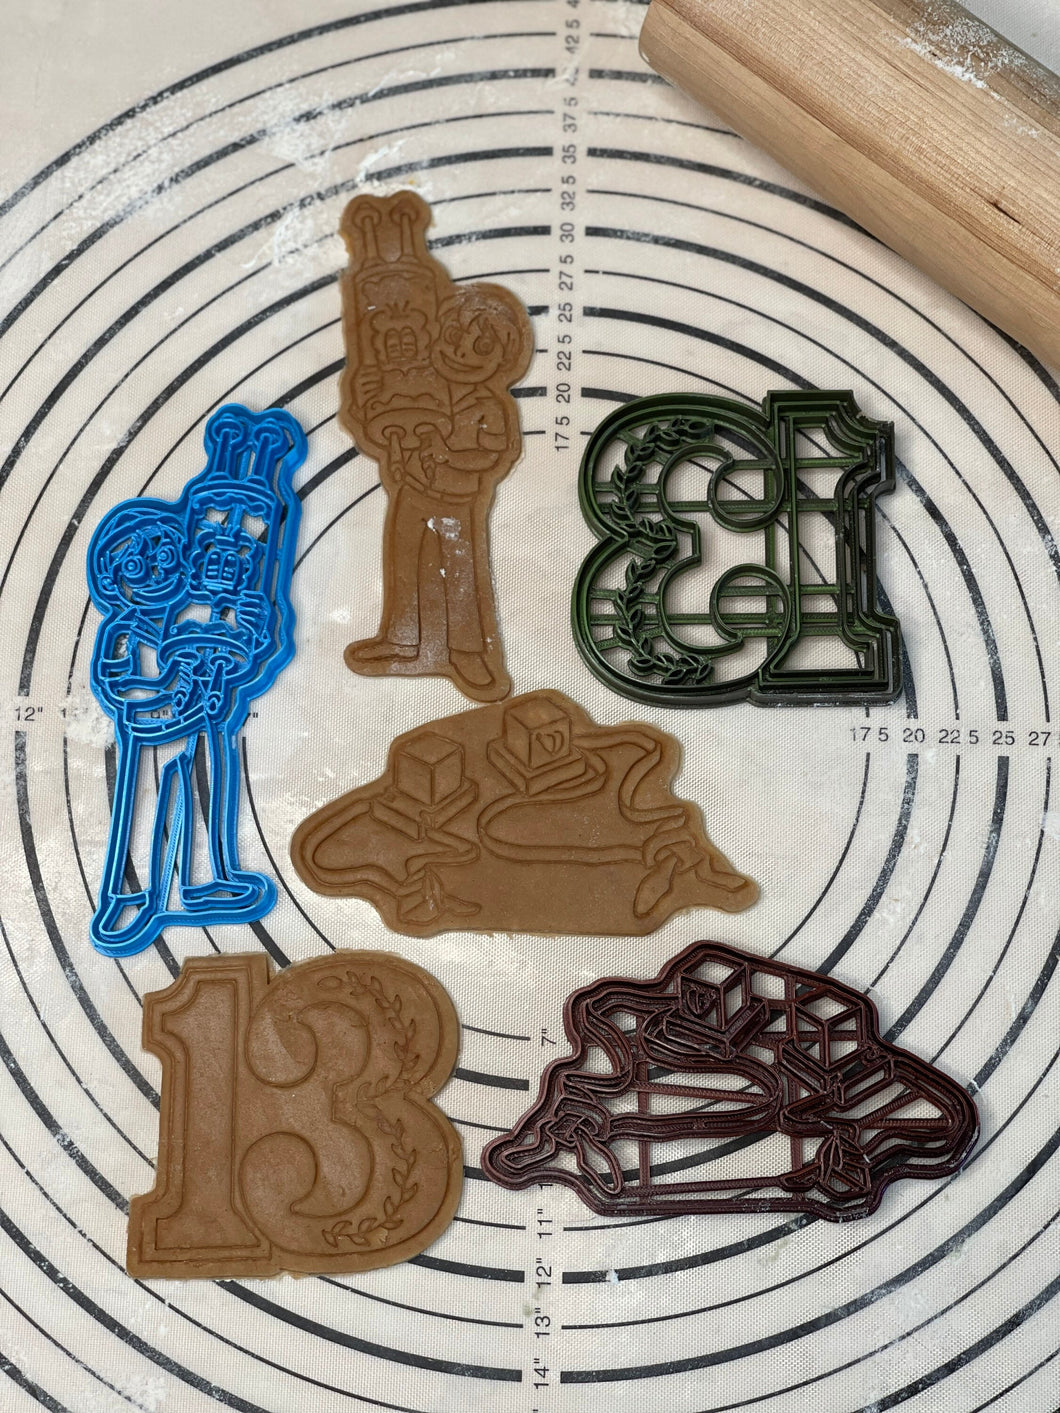 Premium Quality Set of 3 Bar Mizvah, Boy with Torah, Tefillin, Number 13, Cookie Cutters & Molds Produced by 3D Kitchen Art